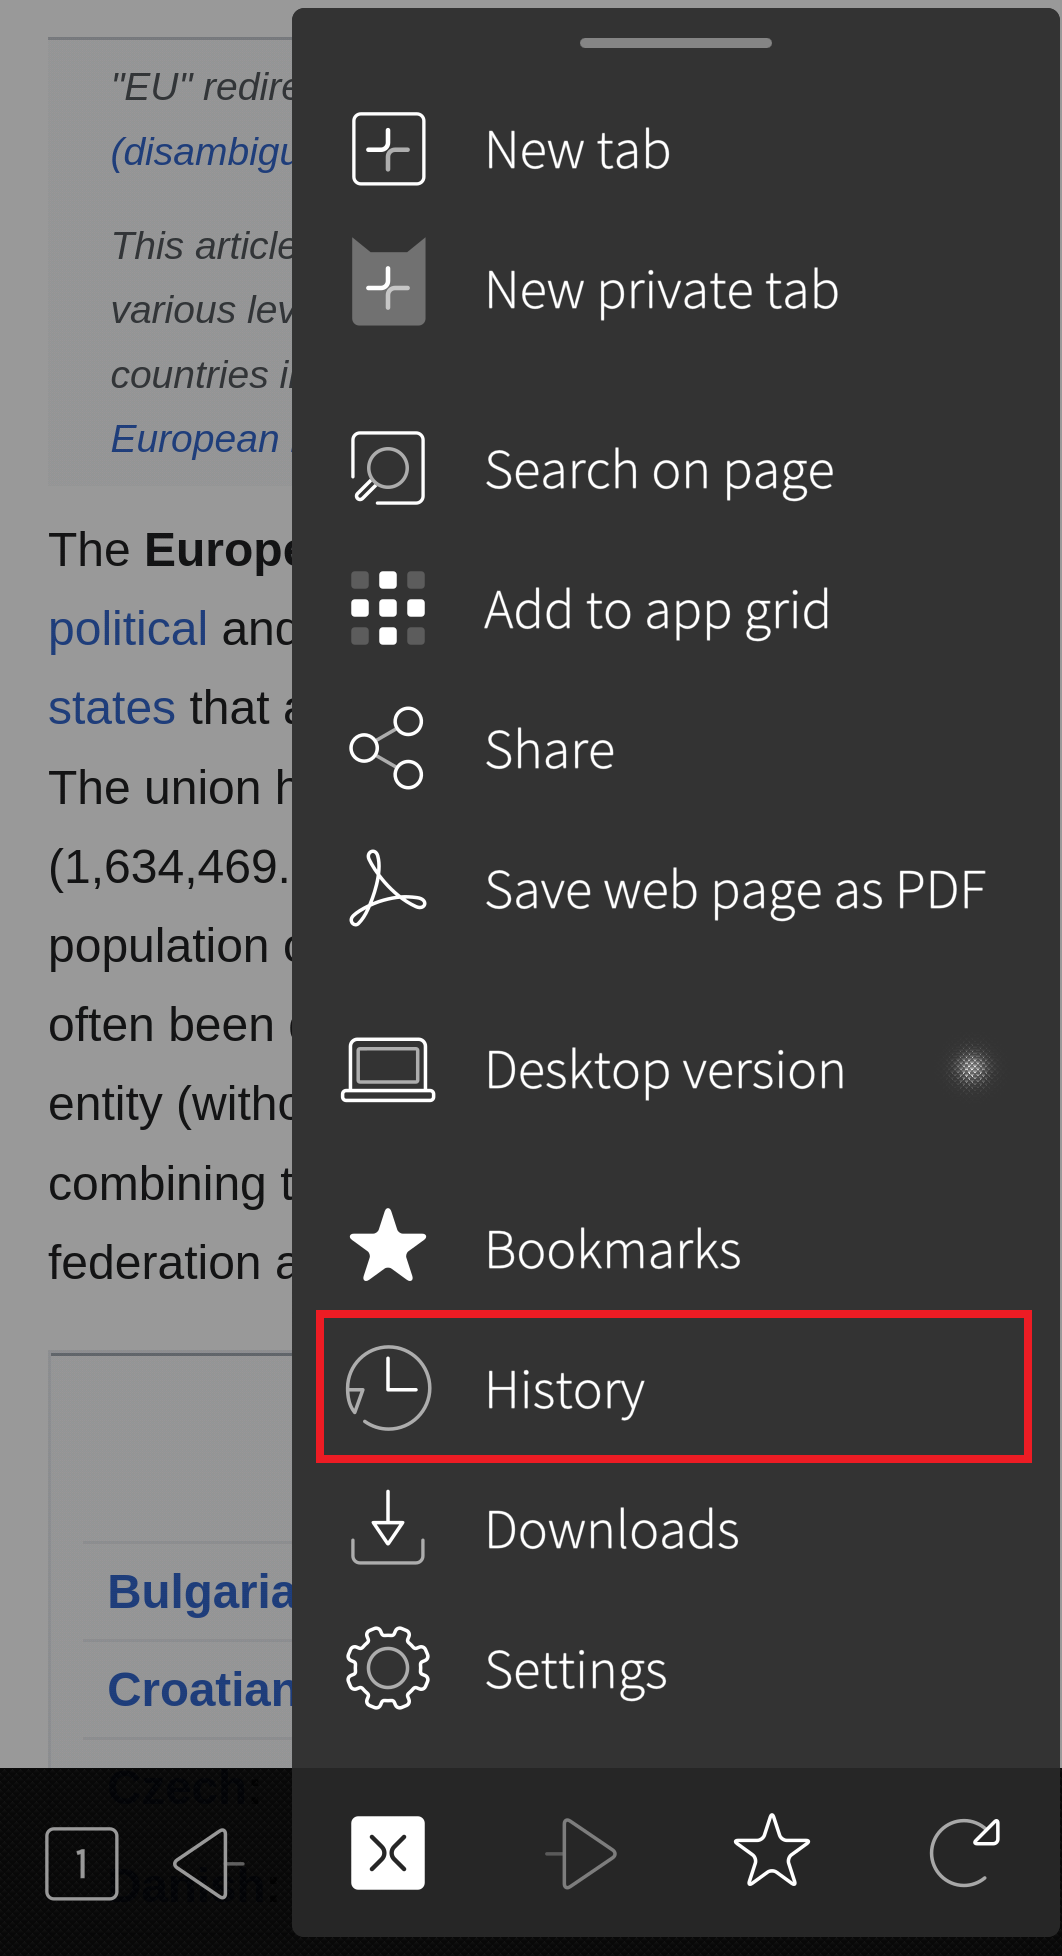 History tool in browser toolset